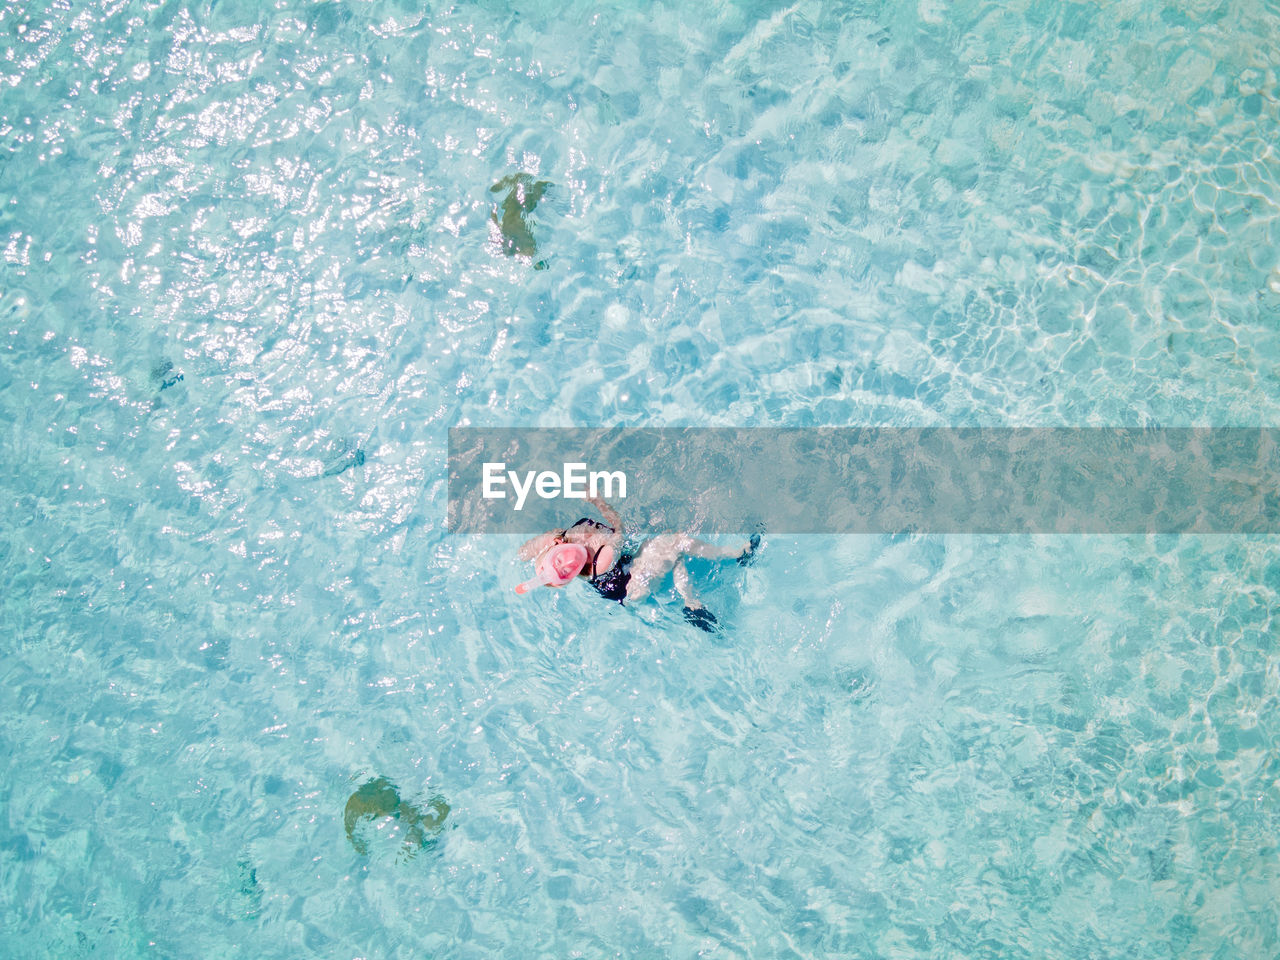 HIGH ANGLE VIEW OF YOUNG MAN SWIMMING IN POOL